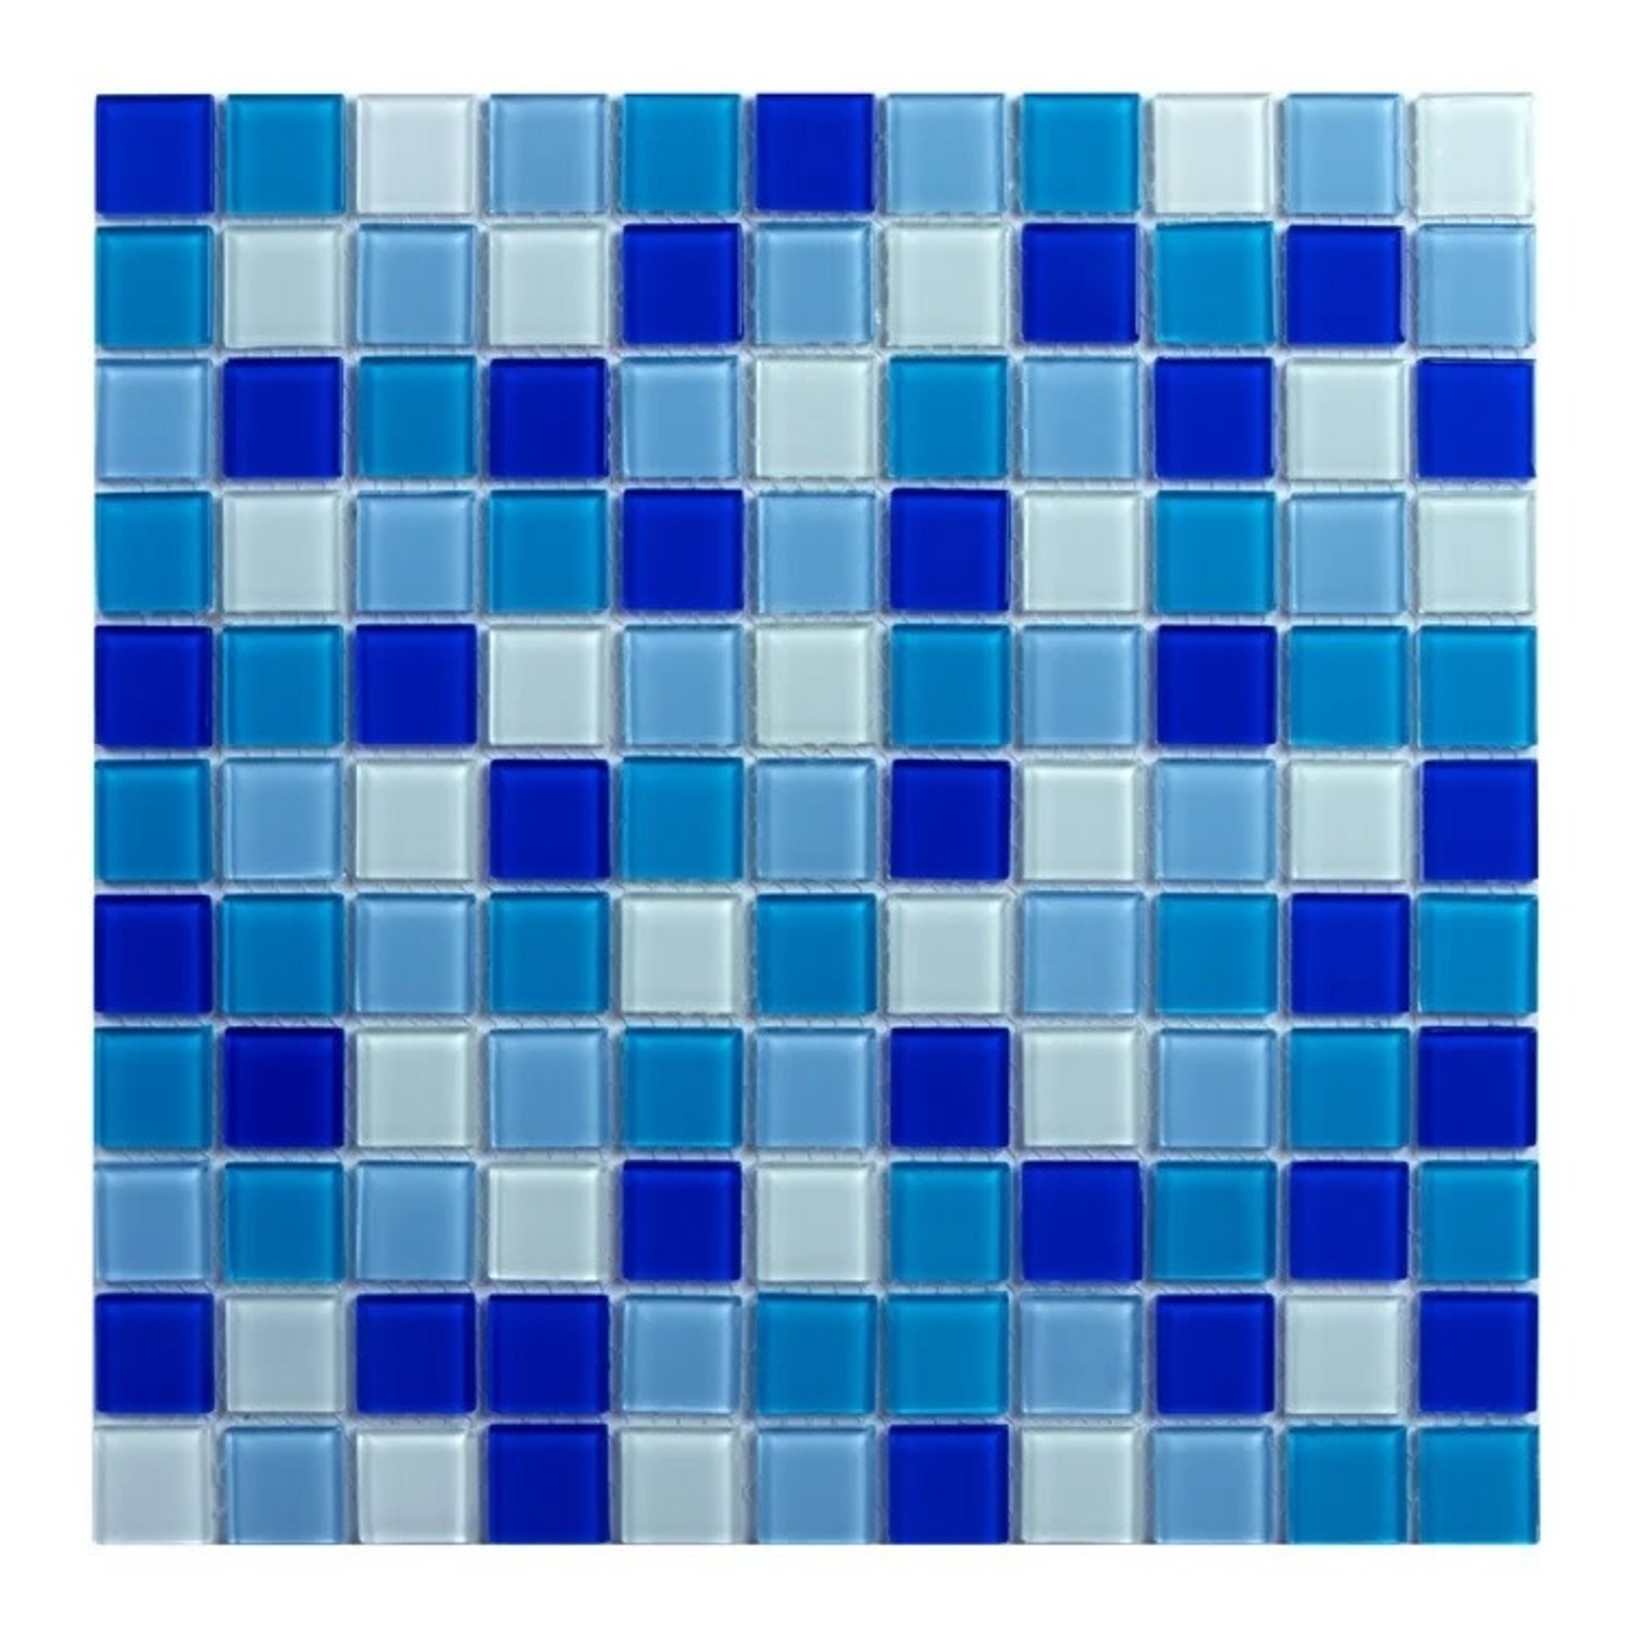 *12"x12" Sheet - 22 Sq Ft Straight Edge1" Glass Mosaic Tile - Box of 22 - Shades of Blue - 2 chips on one tile - Final Sale